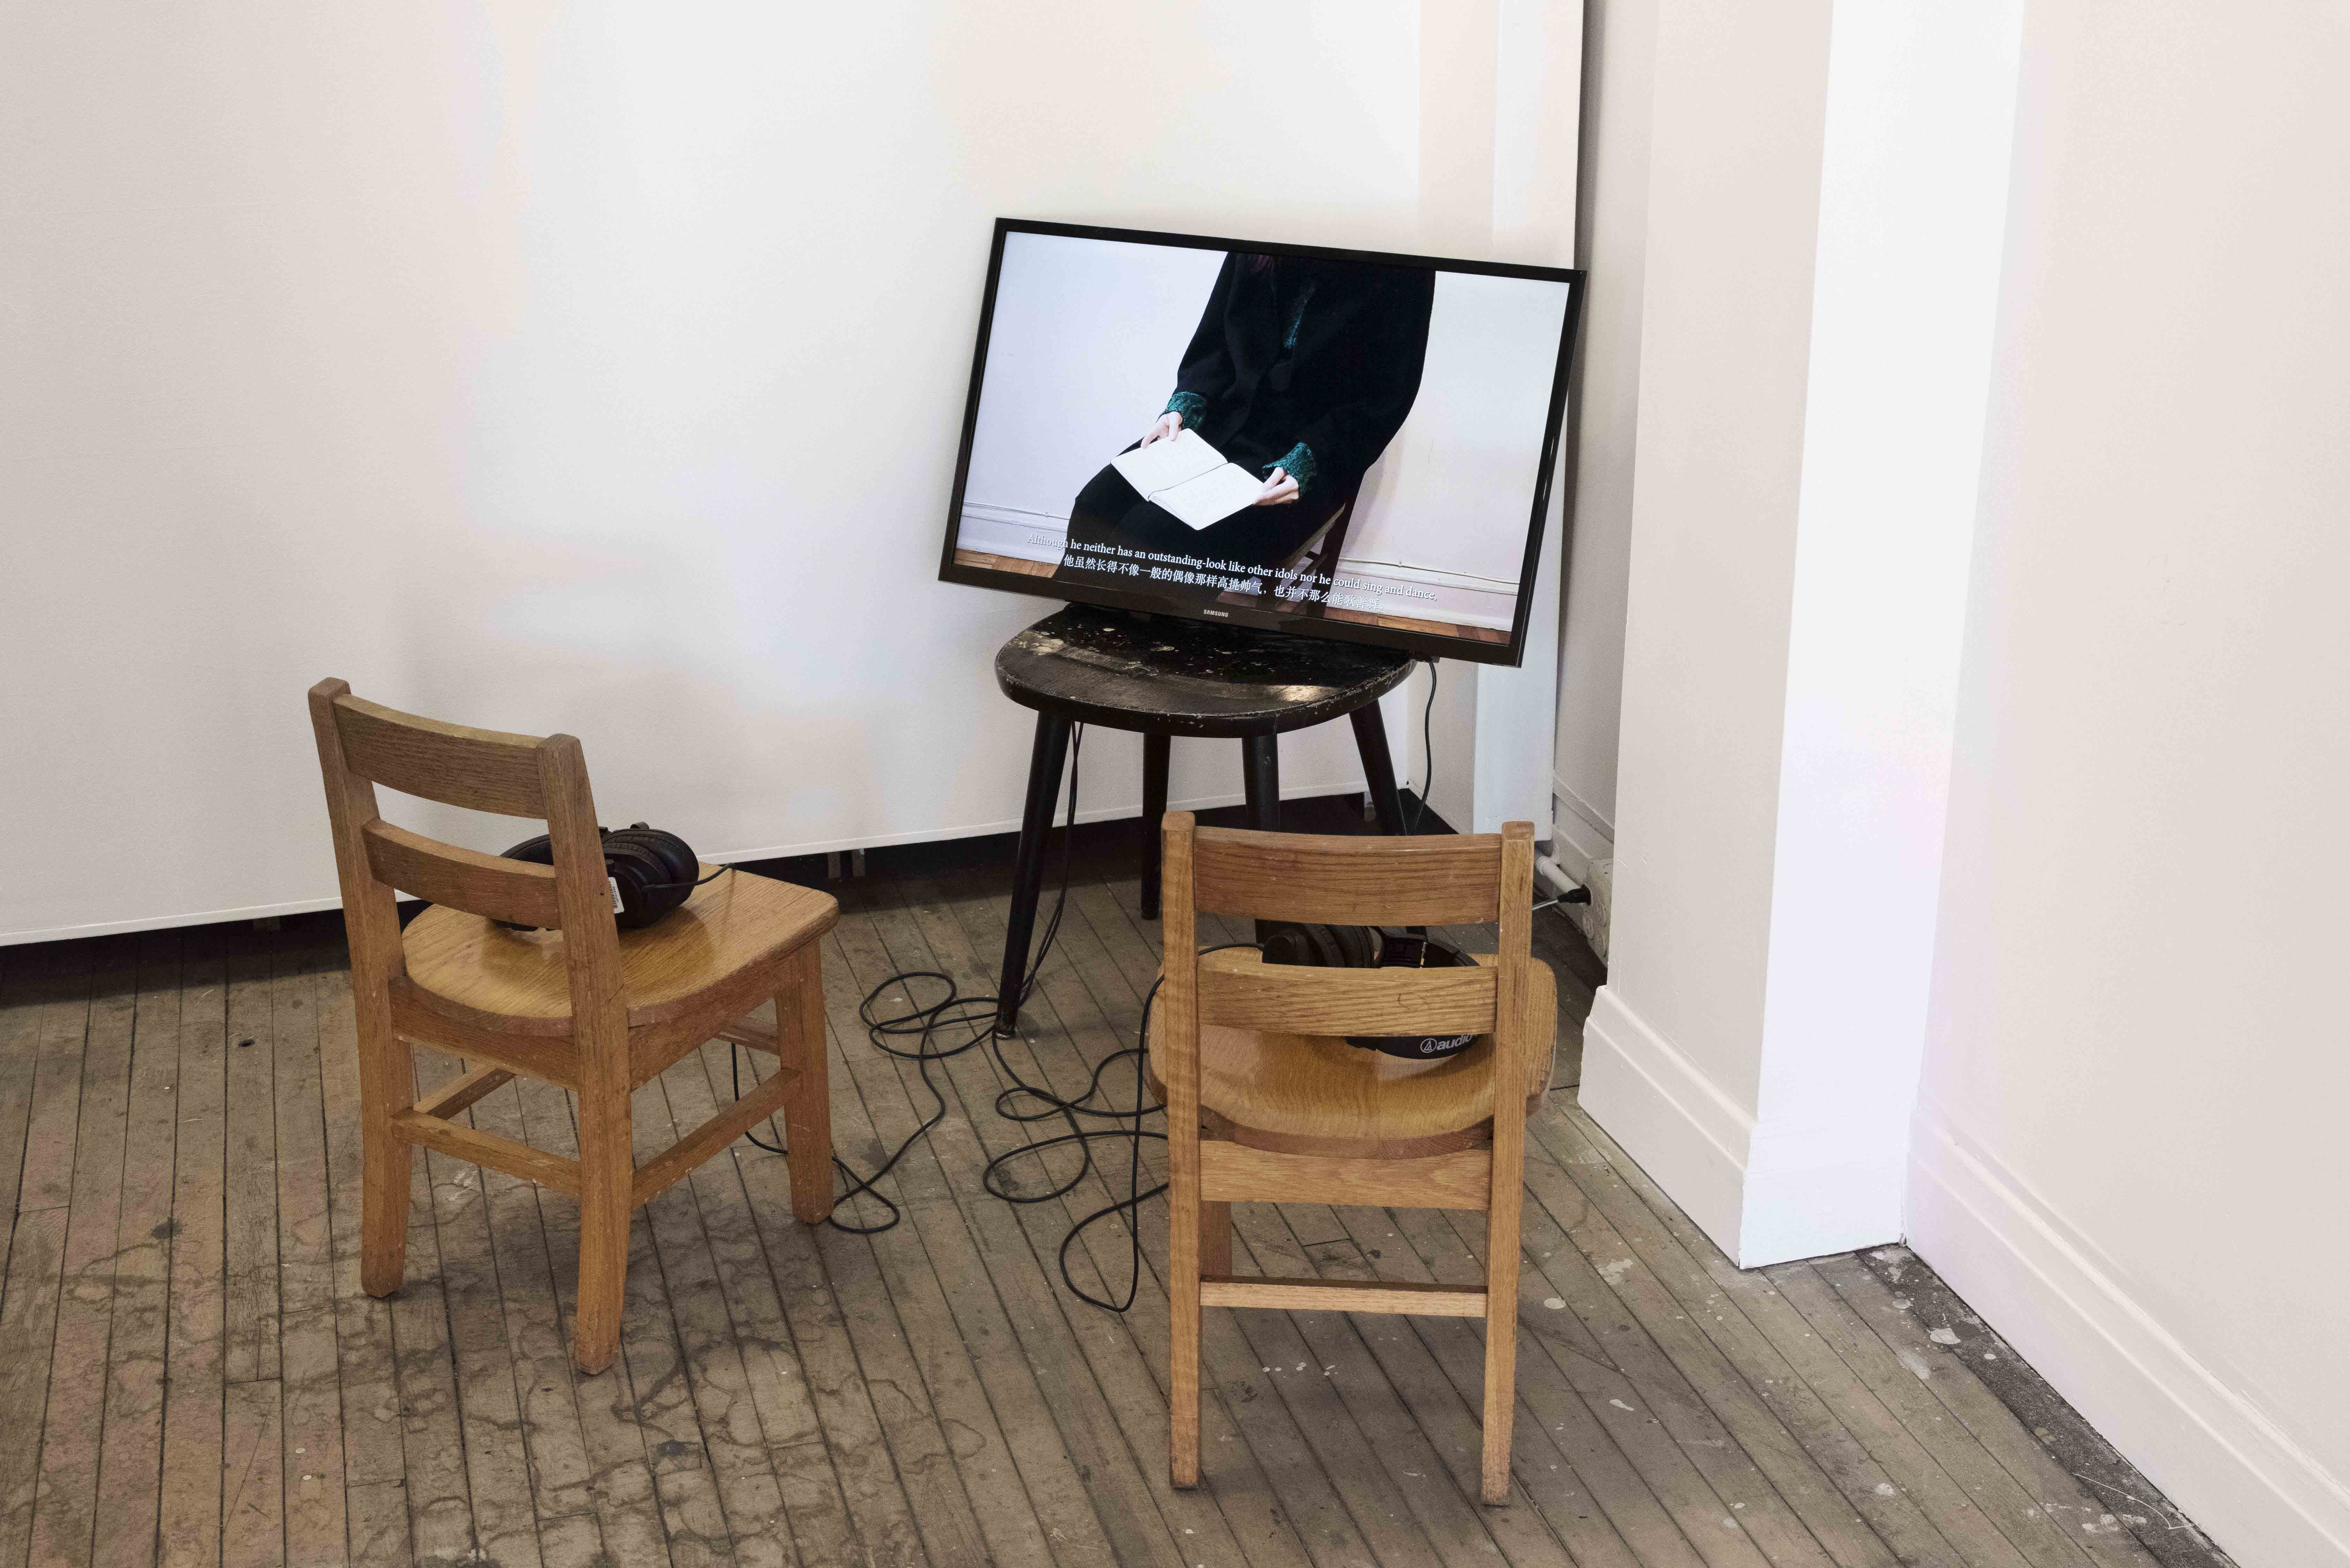 a video on a chair with chairs for the audience